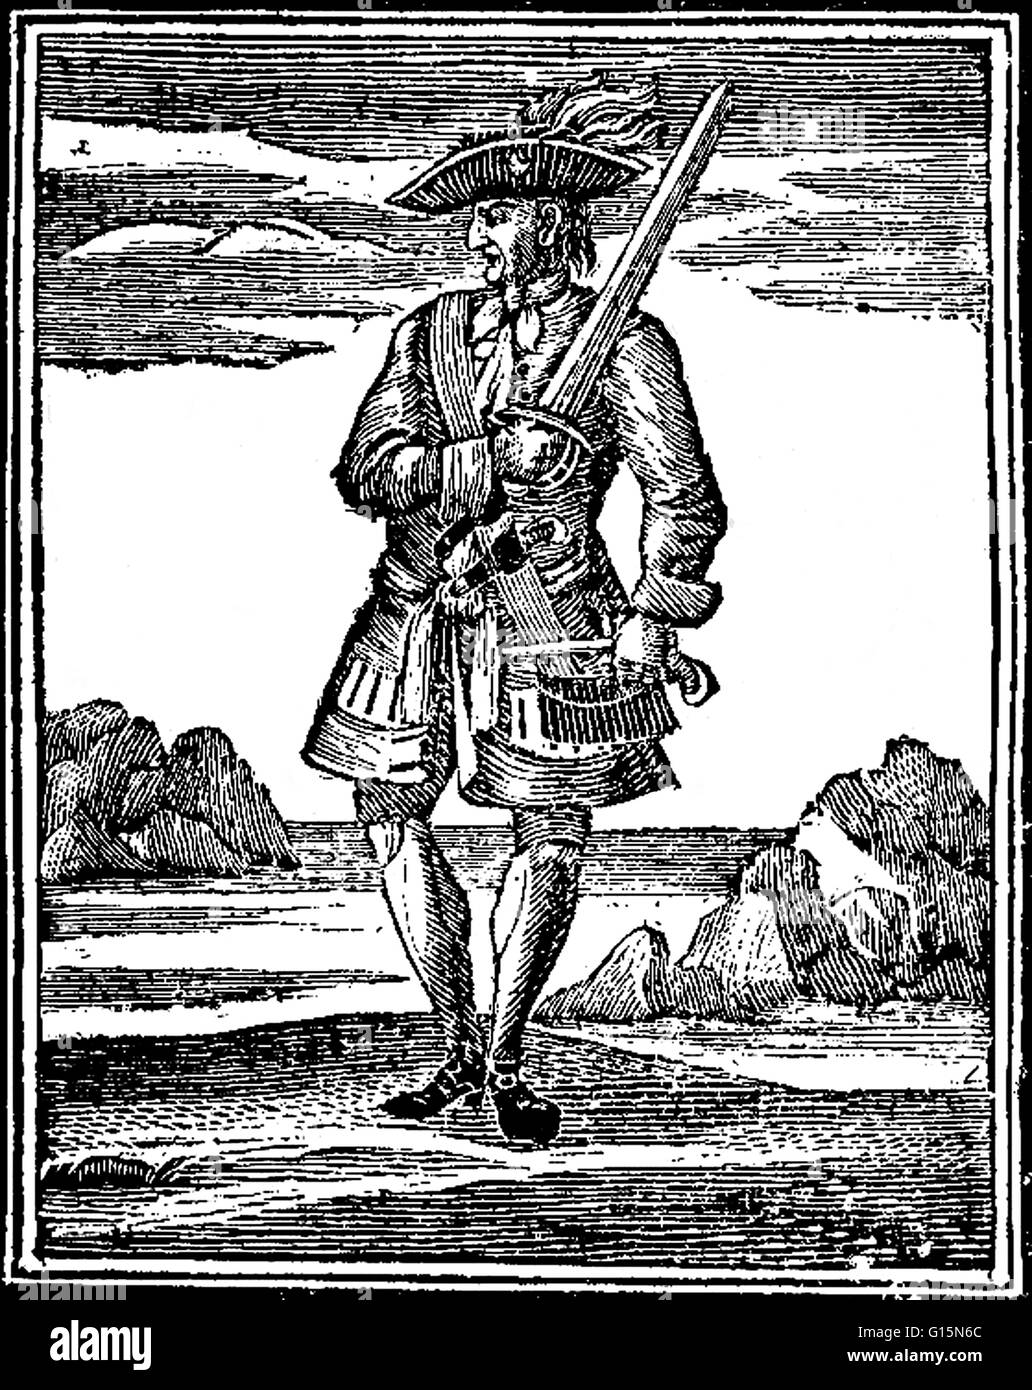 John Rackham (December 27, 1682 - November 18, 1720), commonly known as Calico Jack, was an English pirate captain operating in the Bahamas and in Cuba during the early 18th century. He is most remembered for two things: the design of his Jolly Roger flag Stock Photo